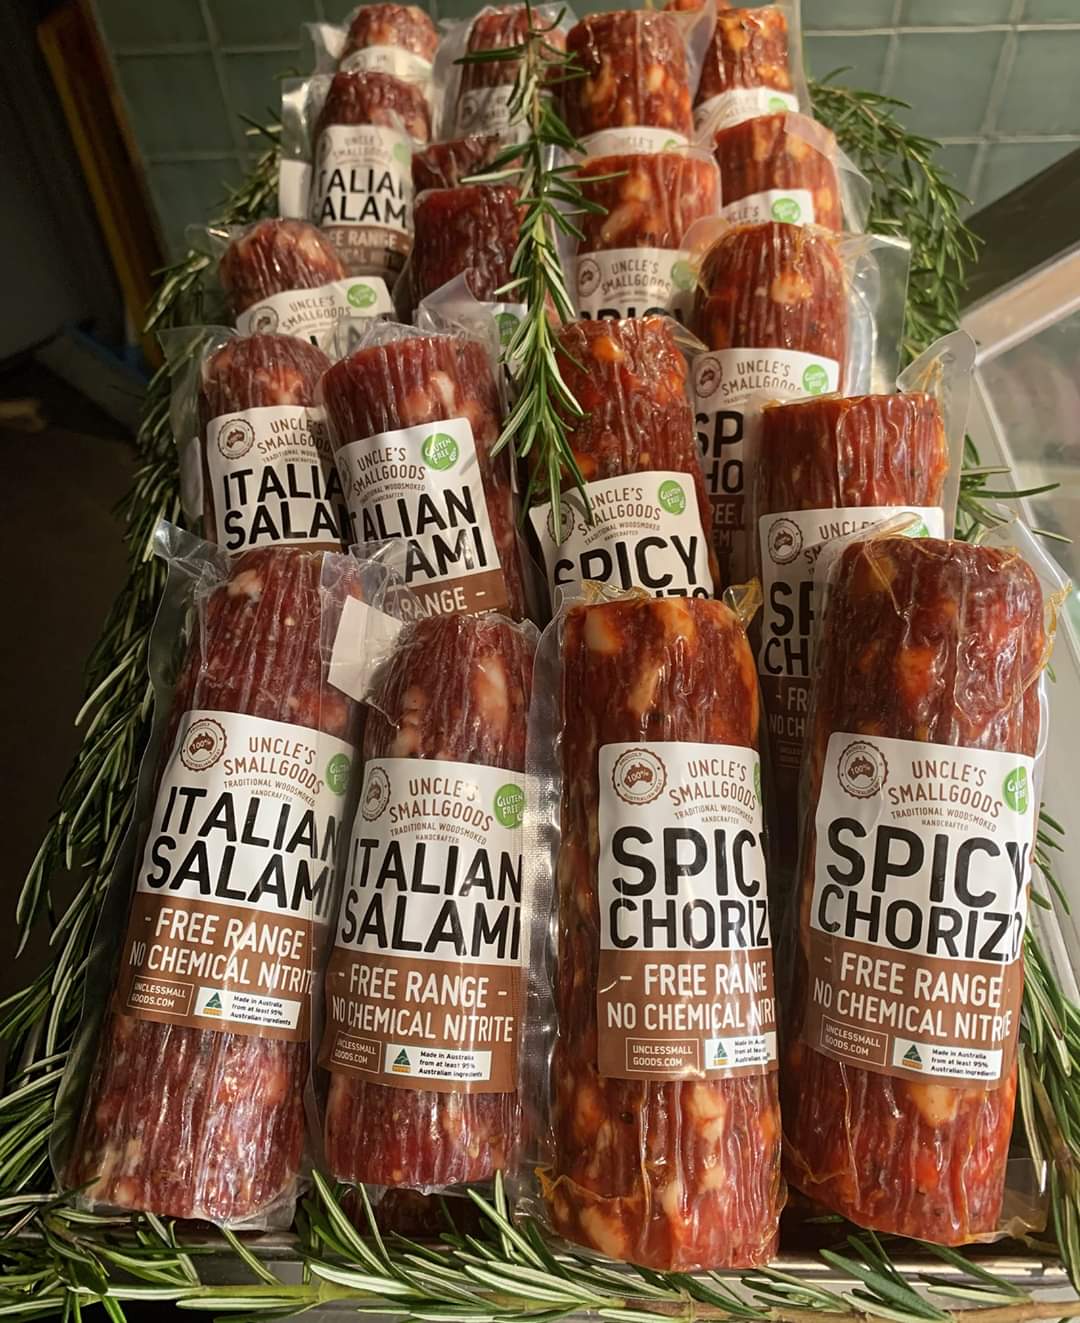 Uncle's Smallgoods: Spicy Chorizo